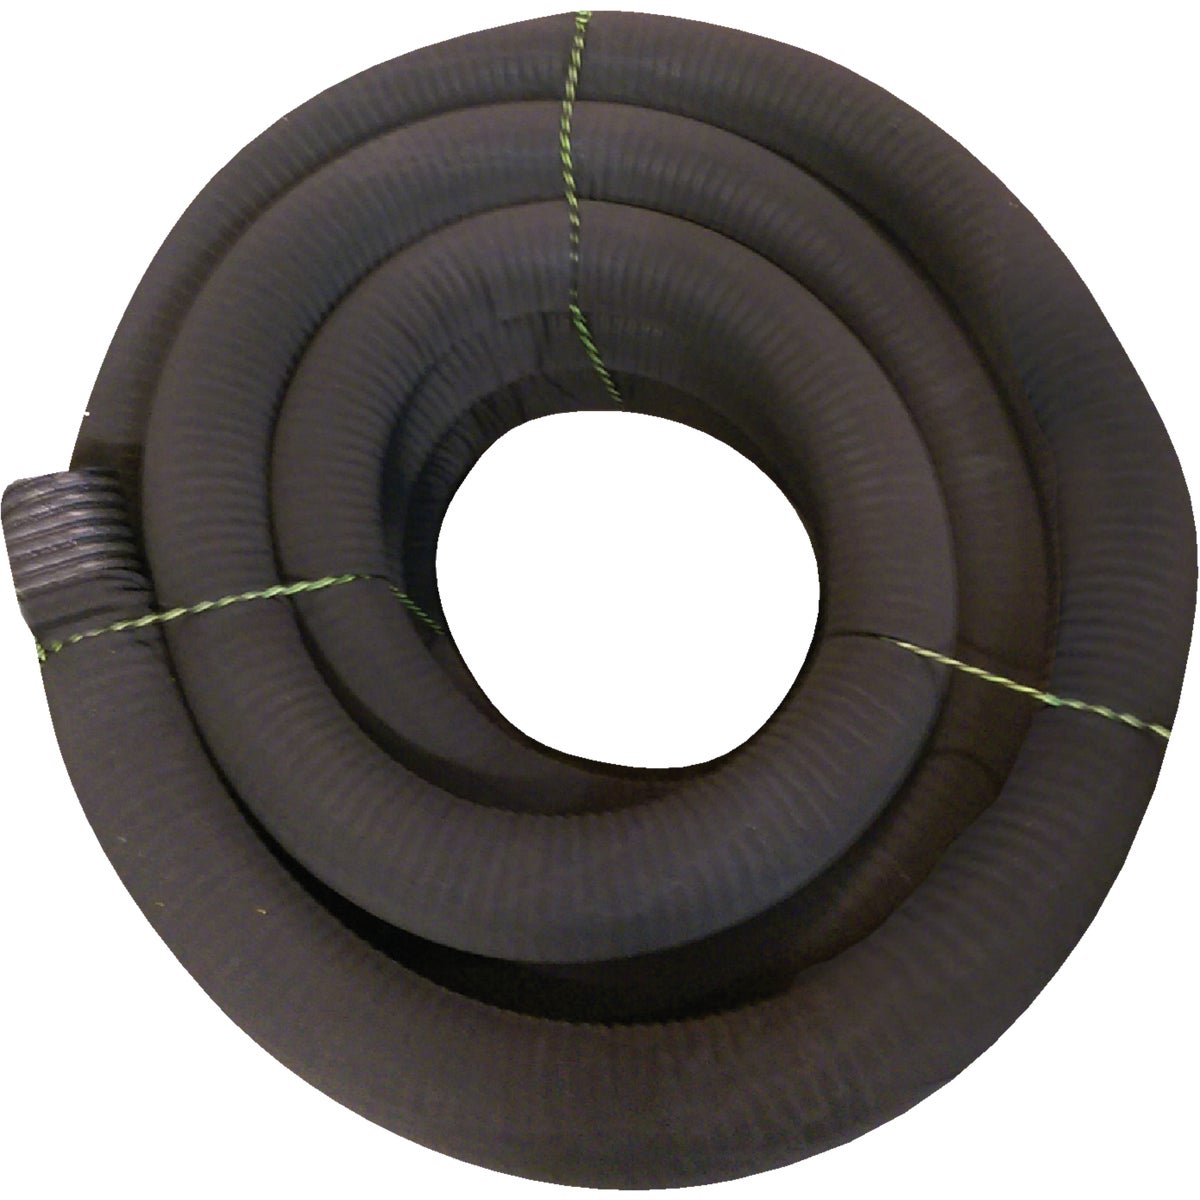 Advanced Drainage Systems 4 In. x 100 Ft. Corrugated Perforated Drainage Pipe with Sock